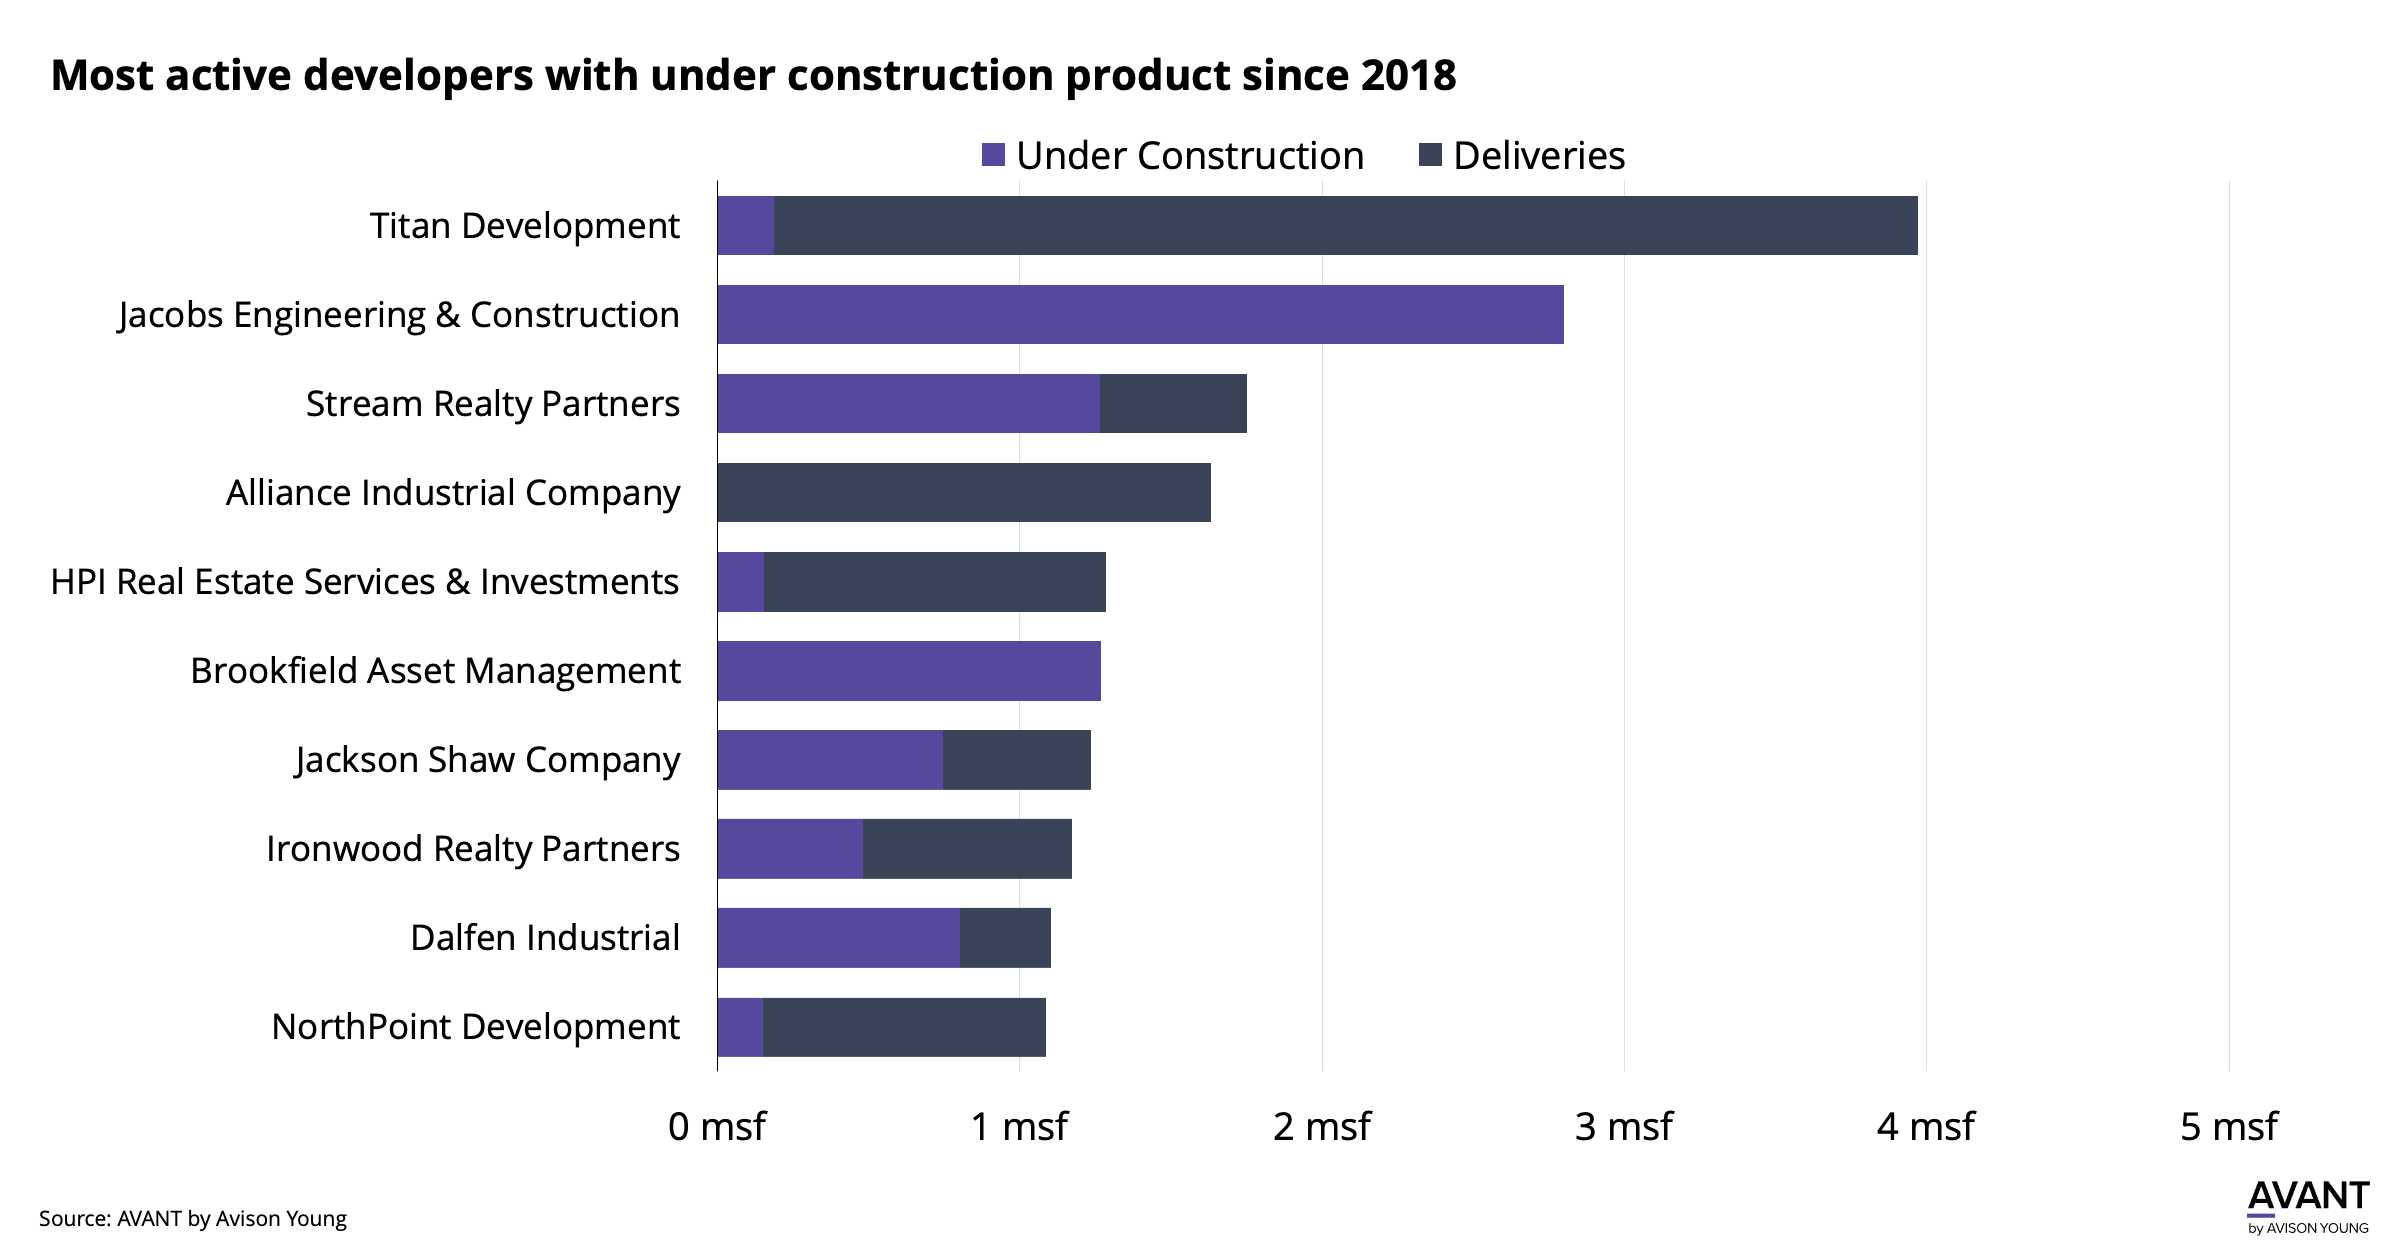 Most active developers with under construction product since 2018